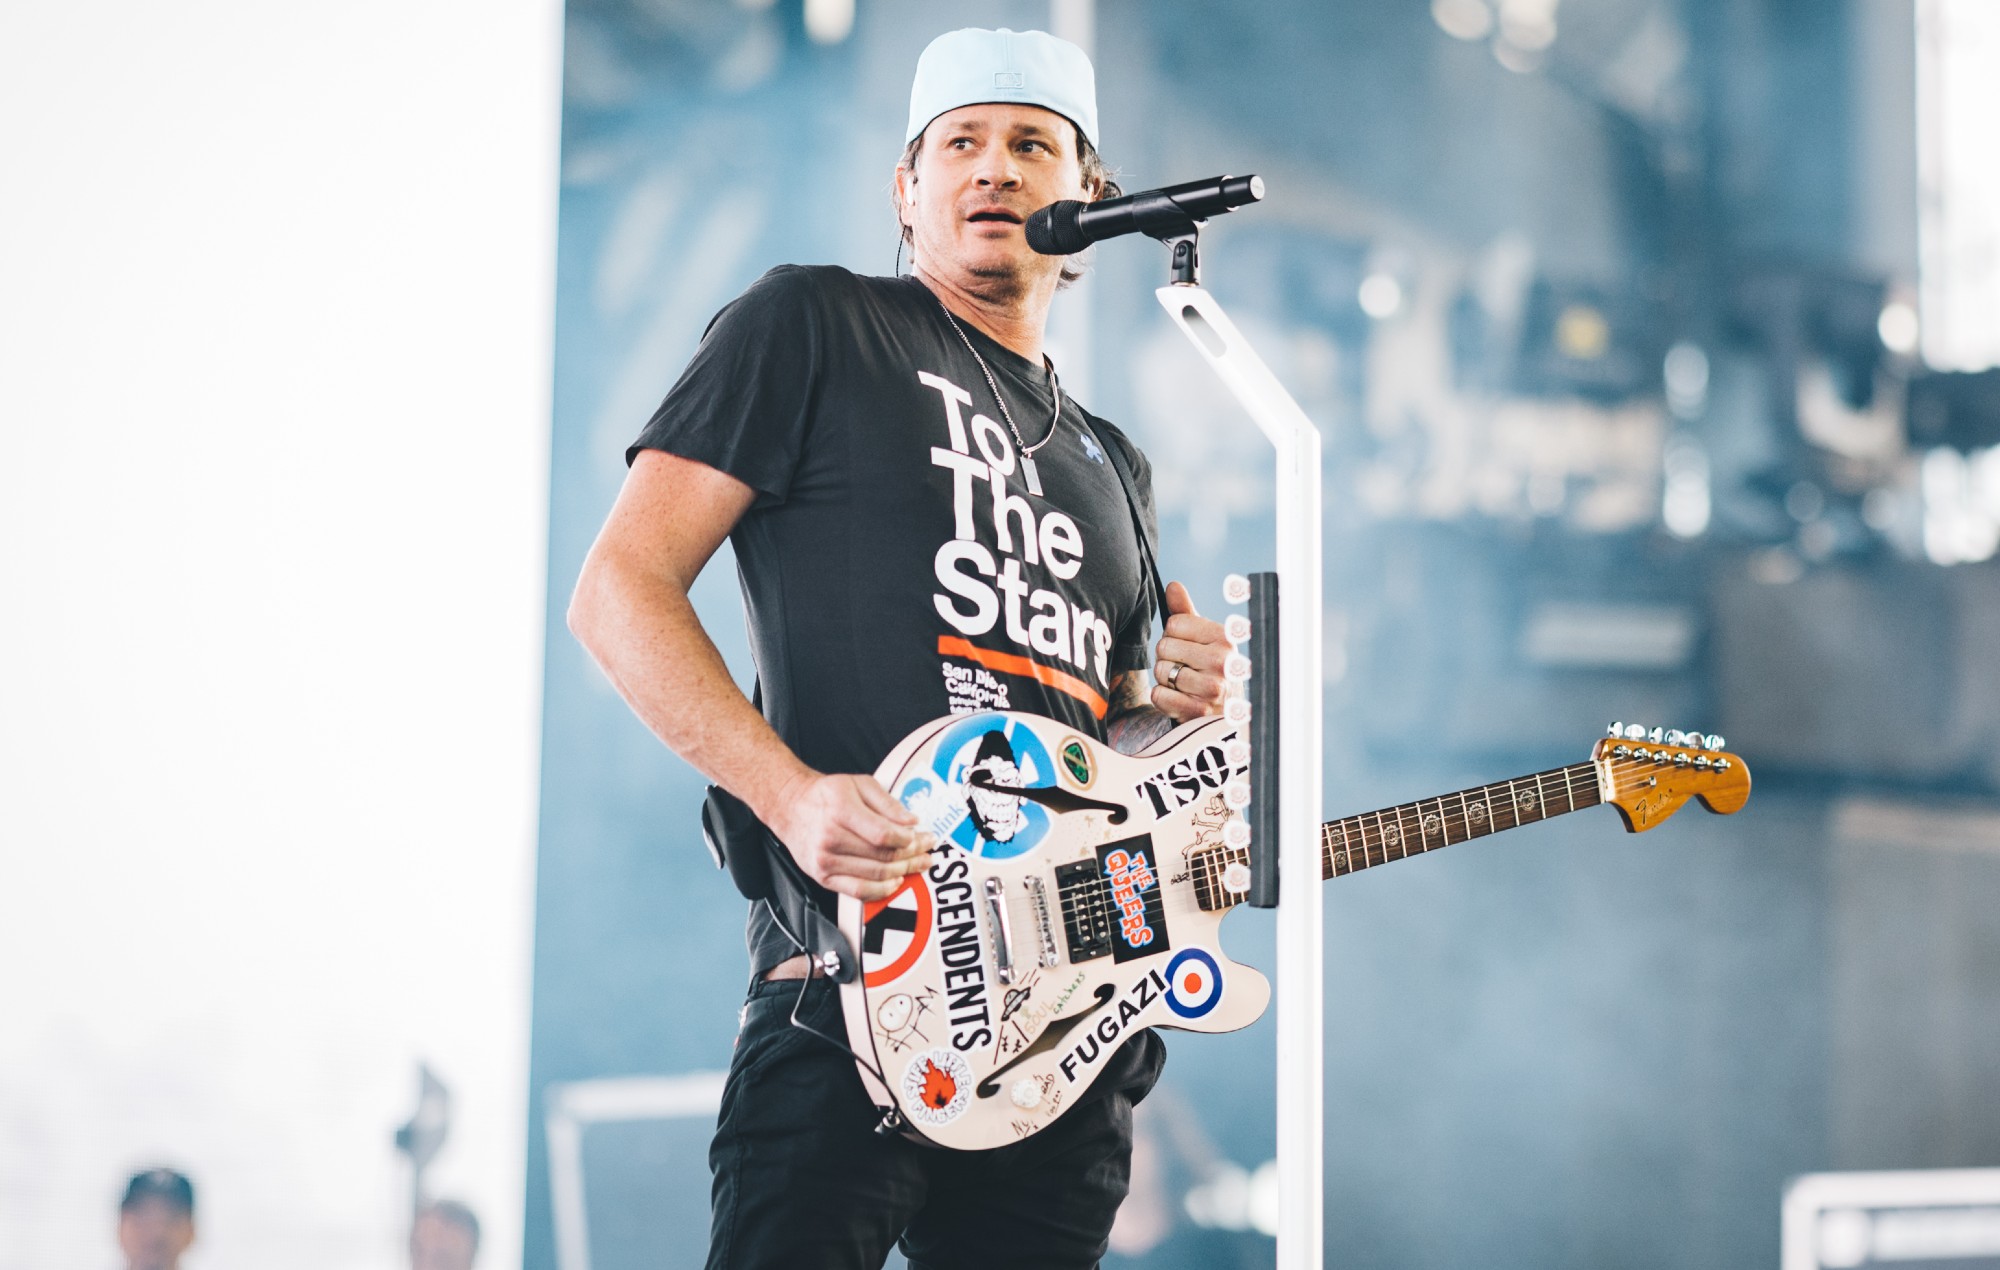 Tom DeLonge on the chances of Blink-182 making a Taylor Swift-style concert movie